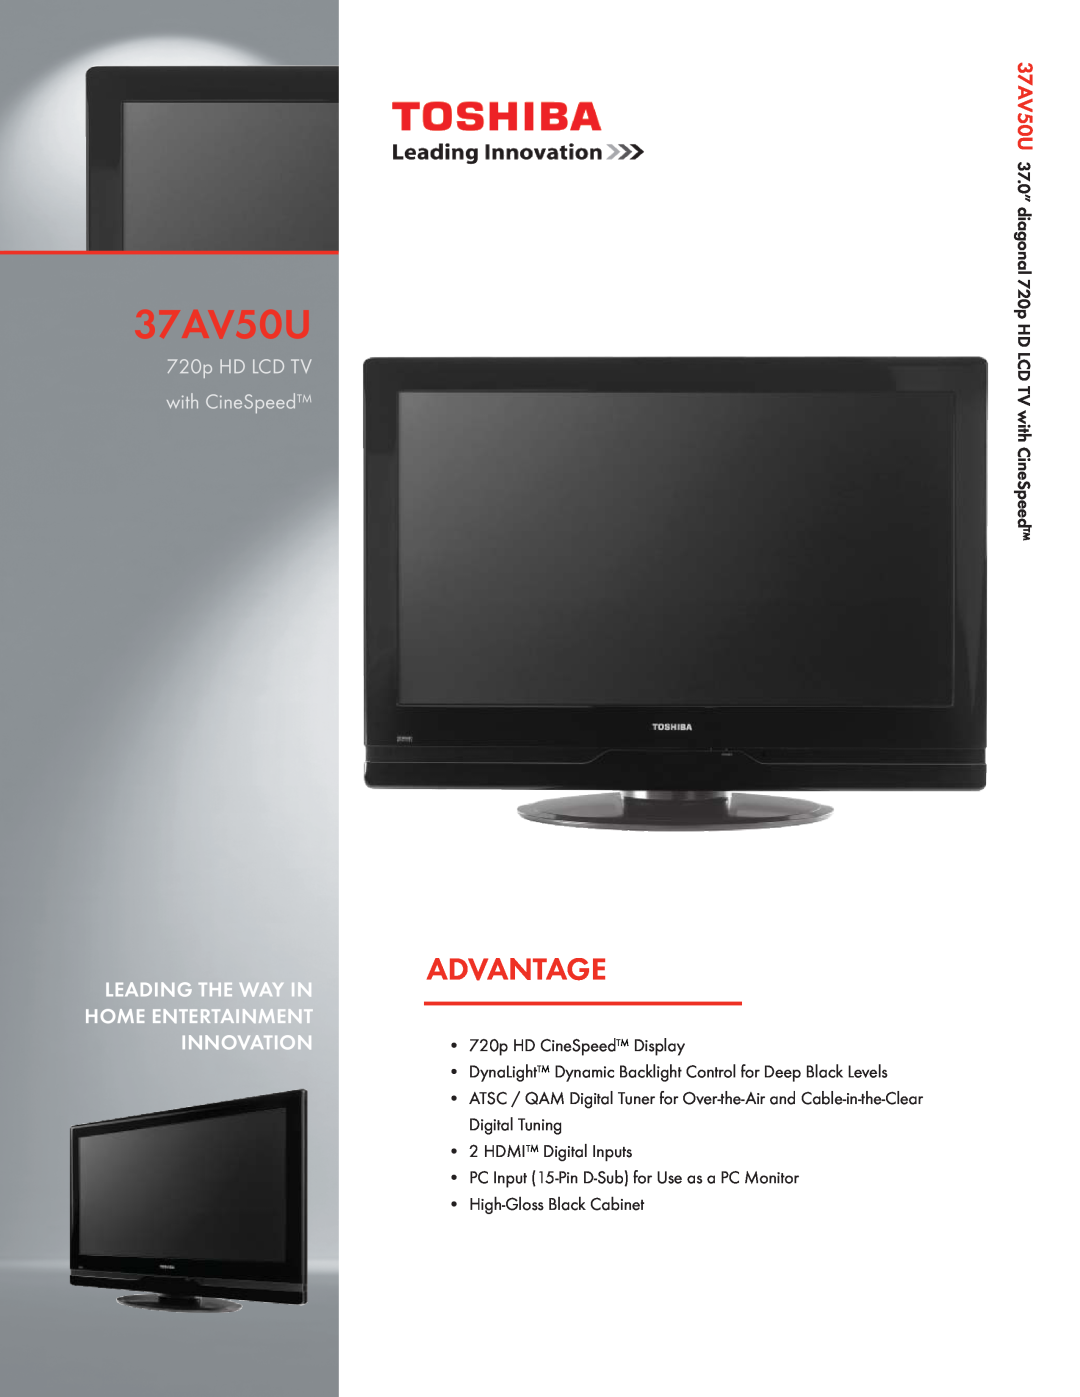 Toshiba 37AV50U manual Advantage, 720p HD LCD TV with CineSpeed, Leading The Way In Home Entertainment Innovation 